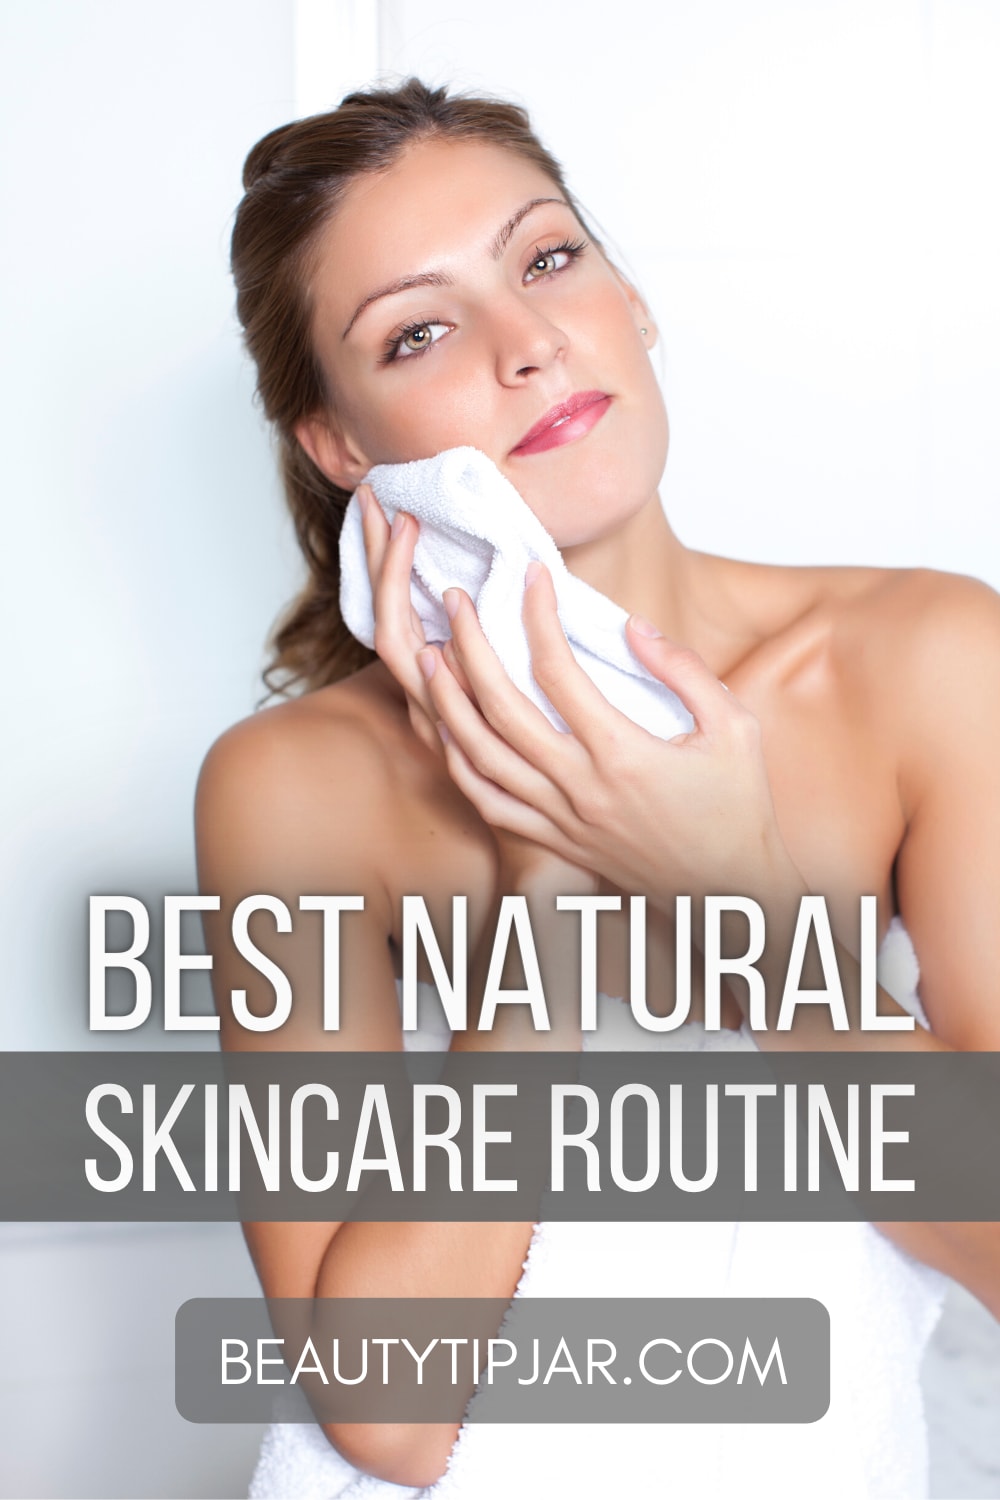 The Most Effective Natural Skincare Routine